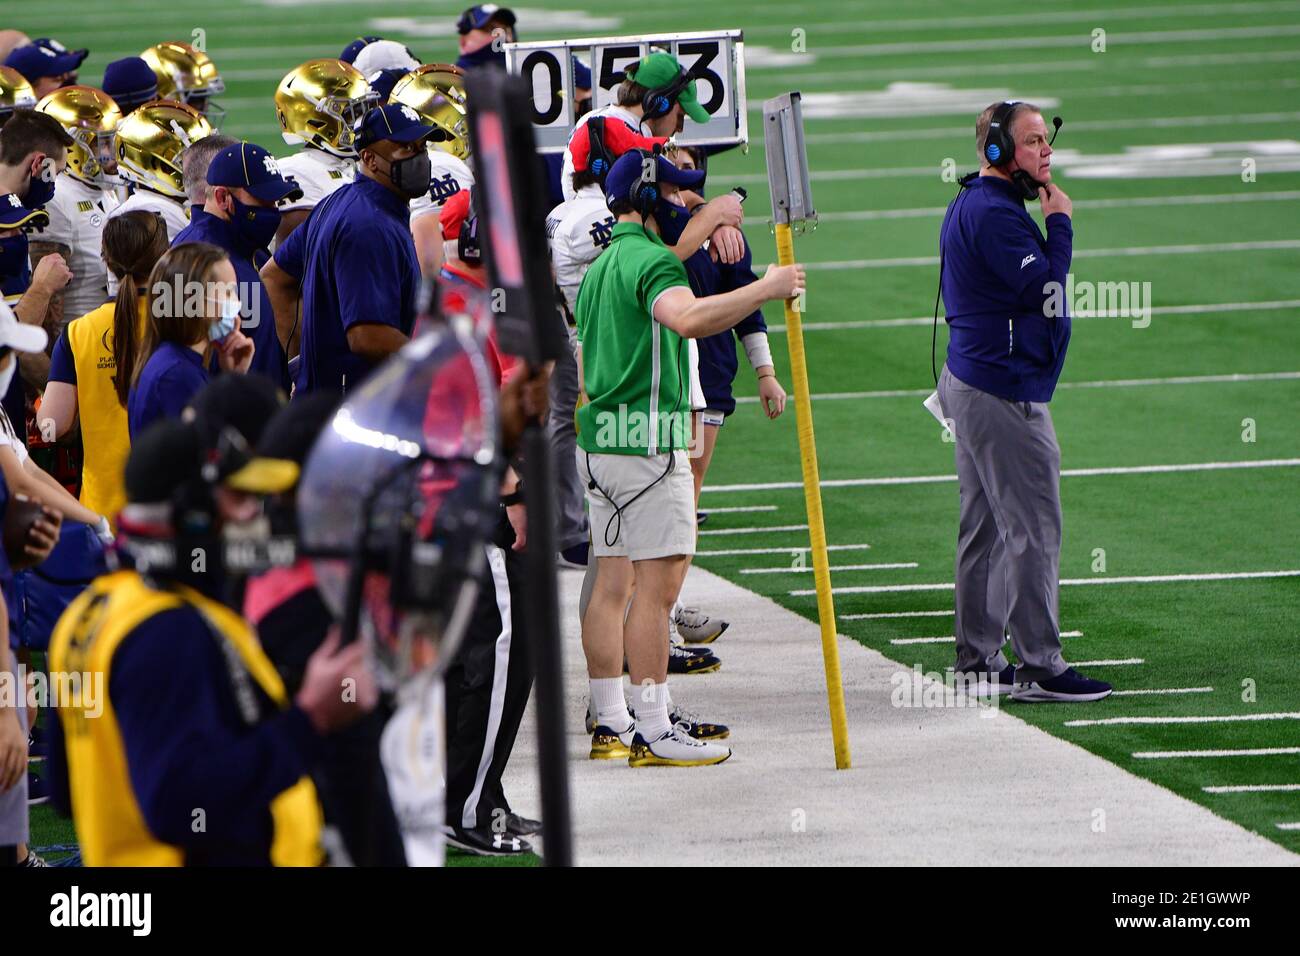 Notre Dame Fighting Irish head coach Brian Kelly In a game between the Alabama Crimson Tide and the Notre Dame Fighting Irish of the 2021 CFP Semifinal Rose Bowl football game Presented by Capital One at AT&T Stadium in Arlington, Texas, January 1st, 2021.Manny Flores/CSM Stock Photo